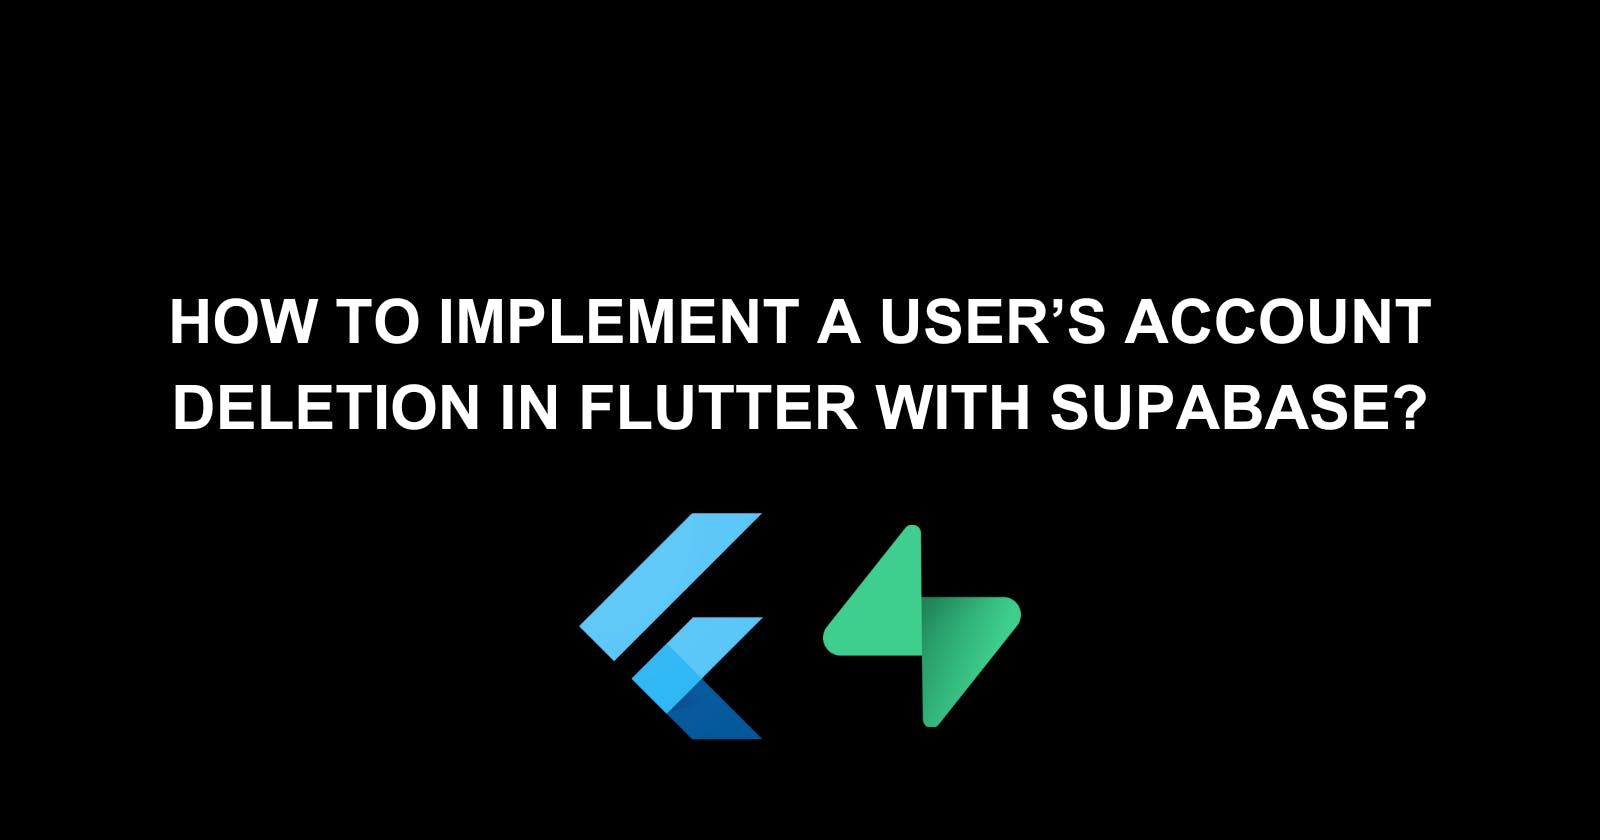 How to implement a user’s account deletion in Flutter with Supabase?